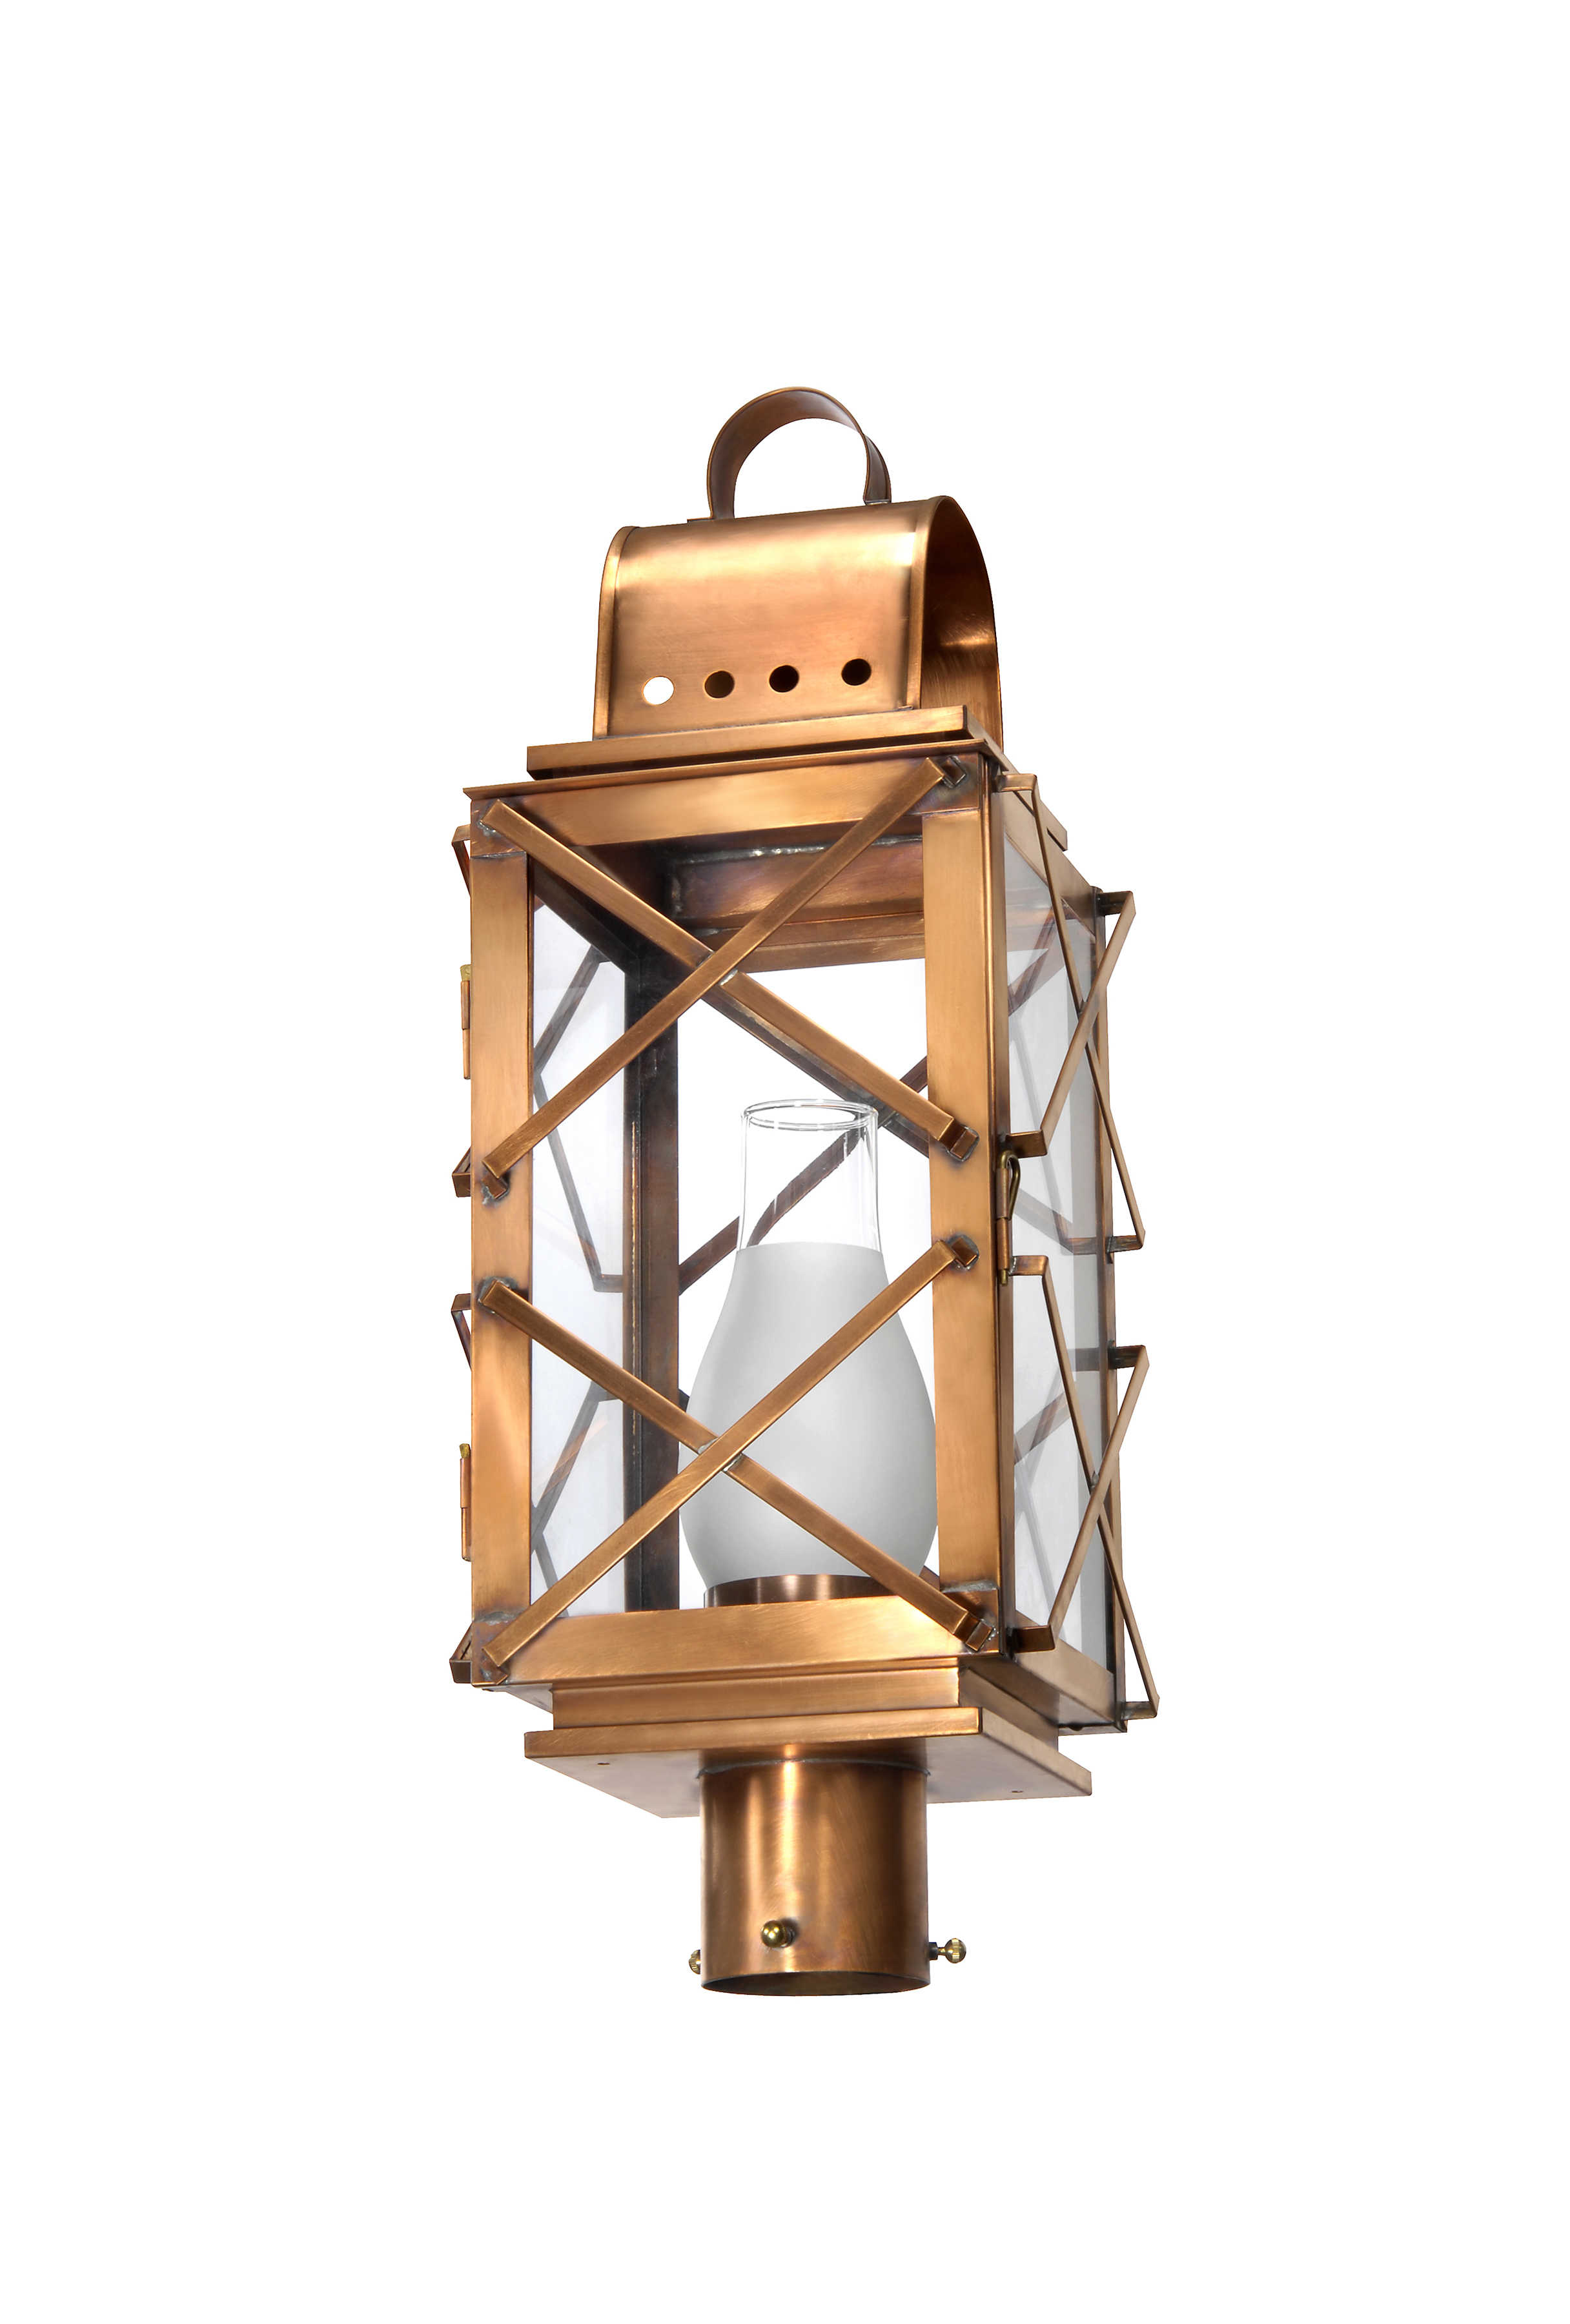 High Battery Collection HB-28 gas post lantern copper lantern gas flame lantern modern gas lantern contemporary lantern contemporary post light coastal lighting